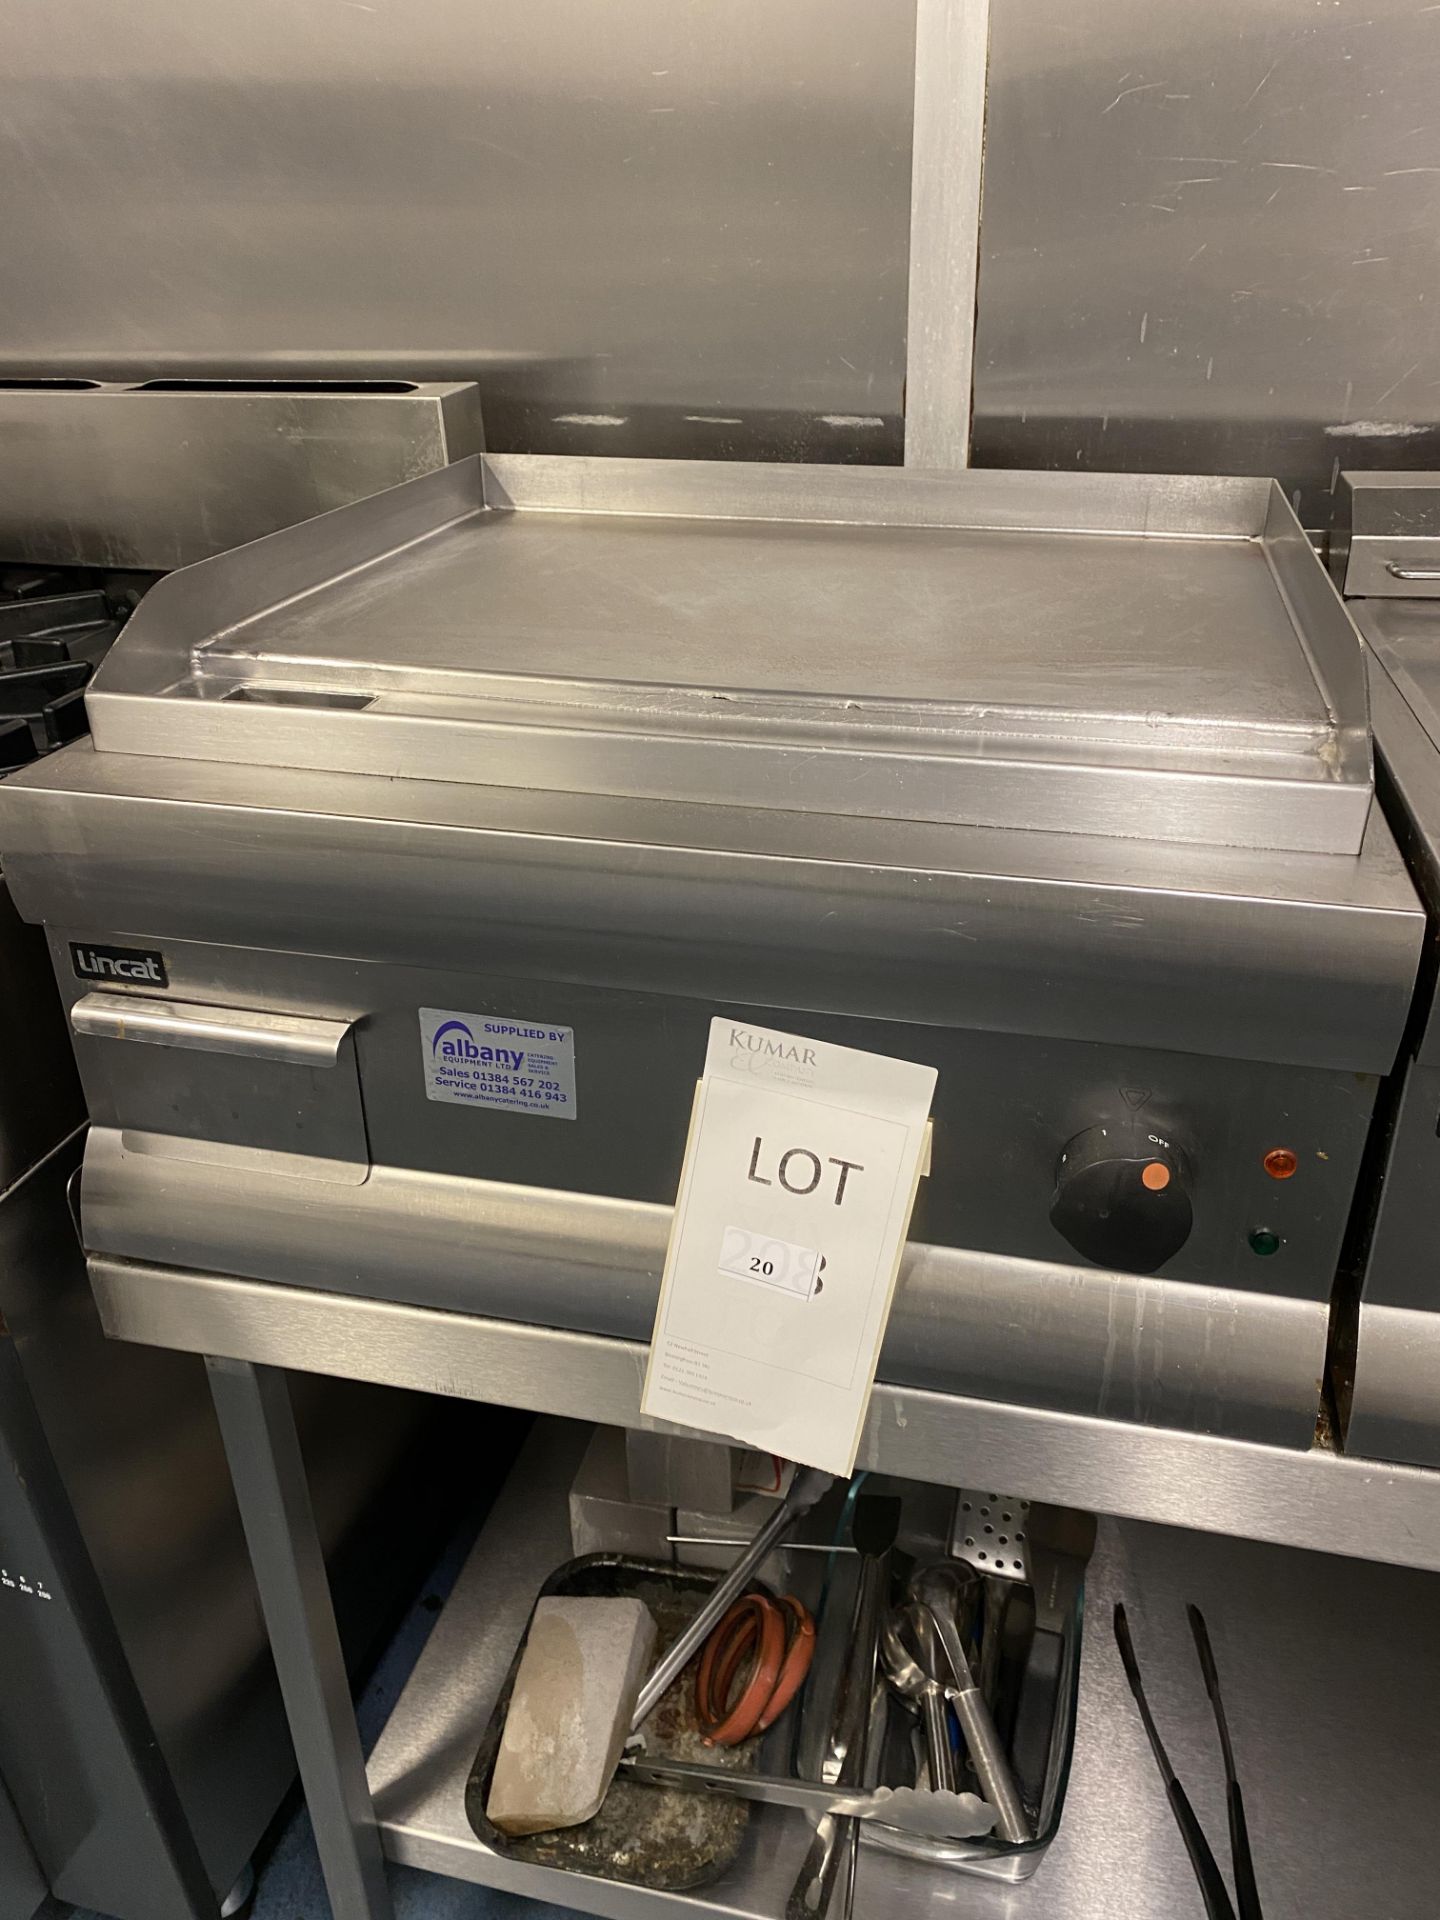 LinCat Stainless Steel Large Hot Plate - Image 4 of 5